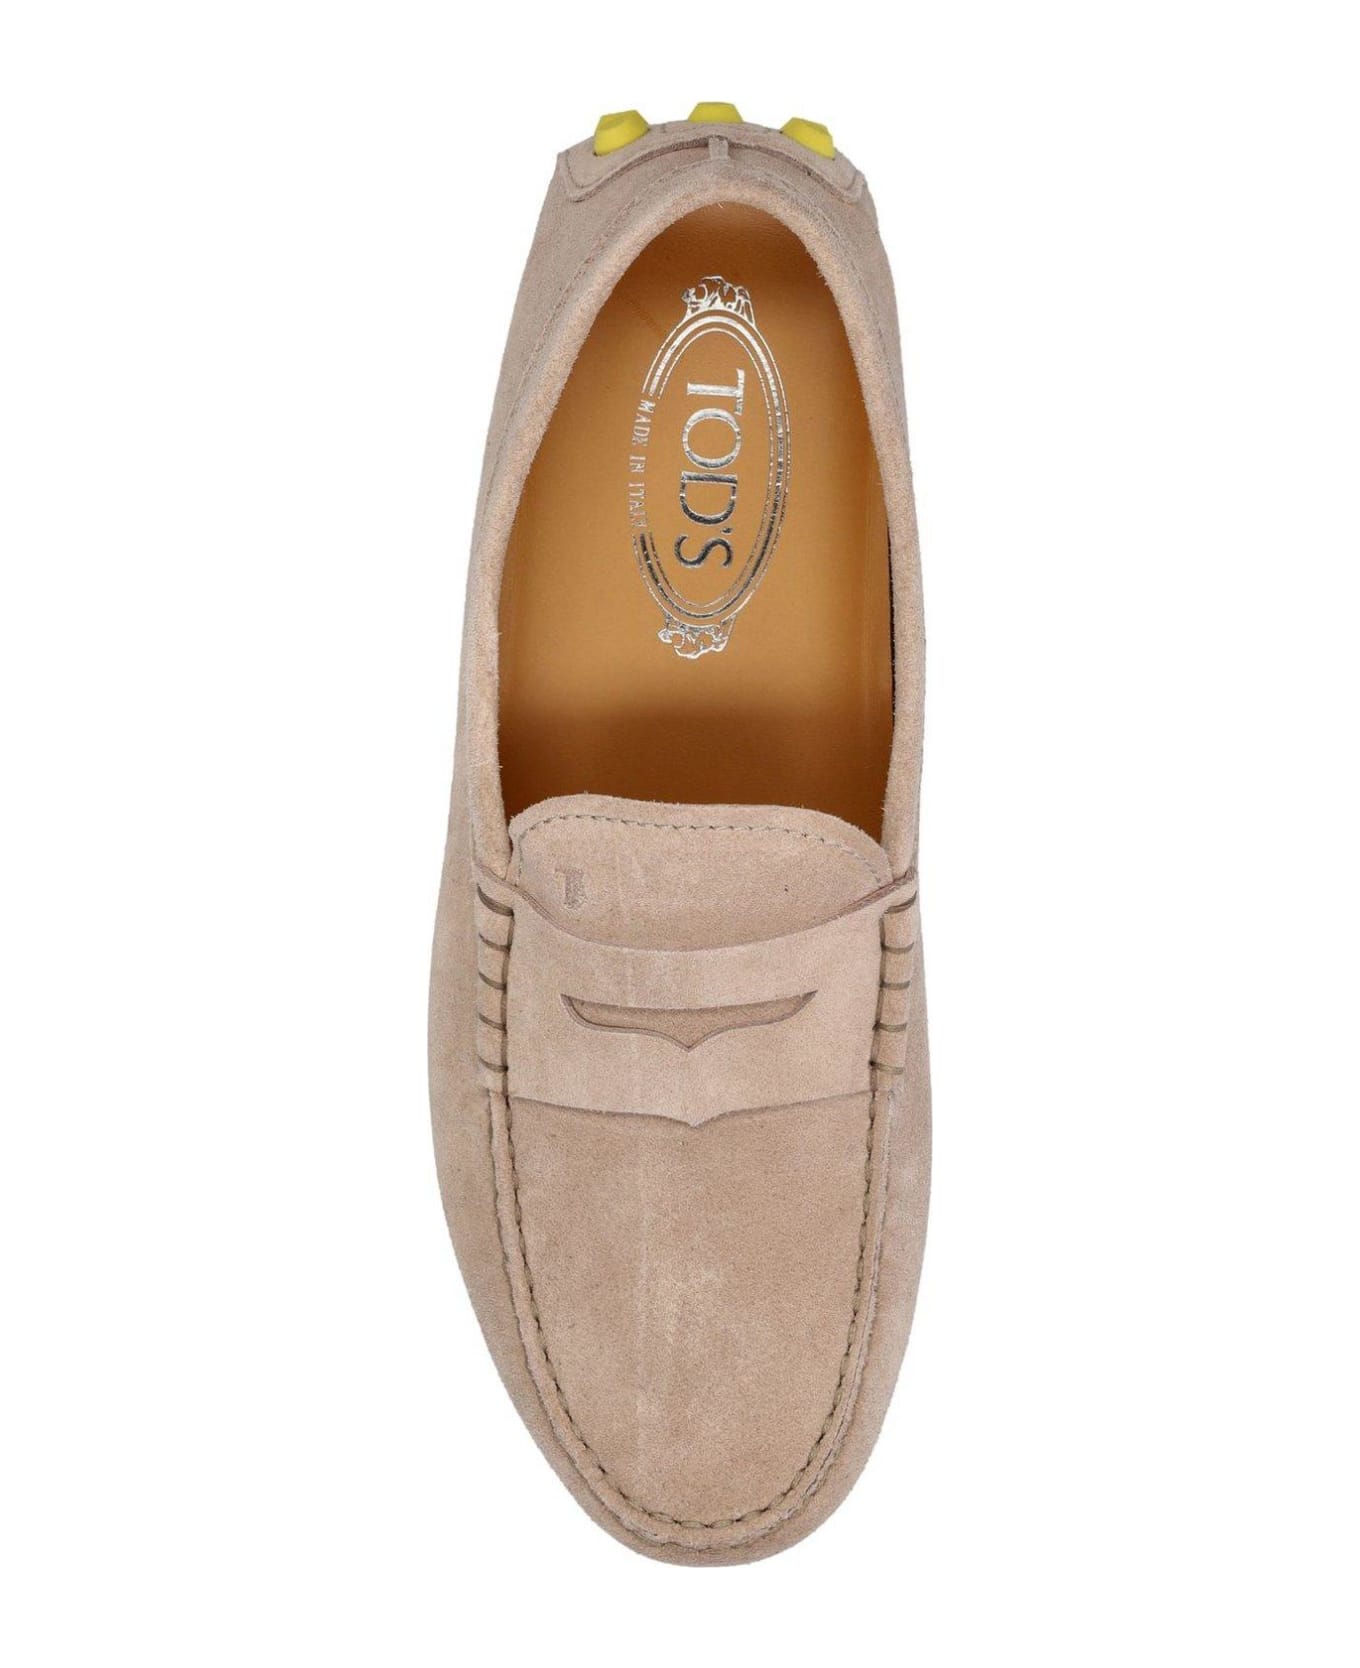 Tod's Gommino Slip-on Driving 31Q4954J Shoes - Cipria